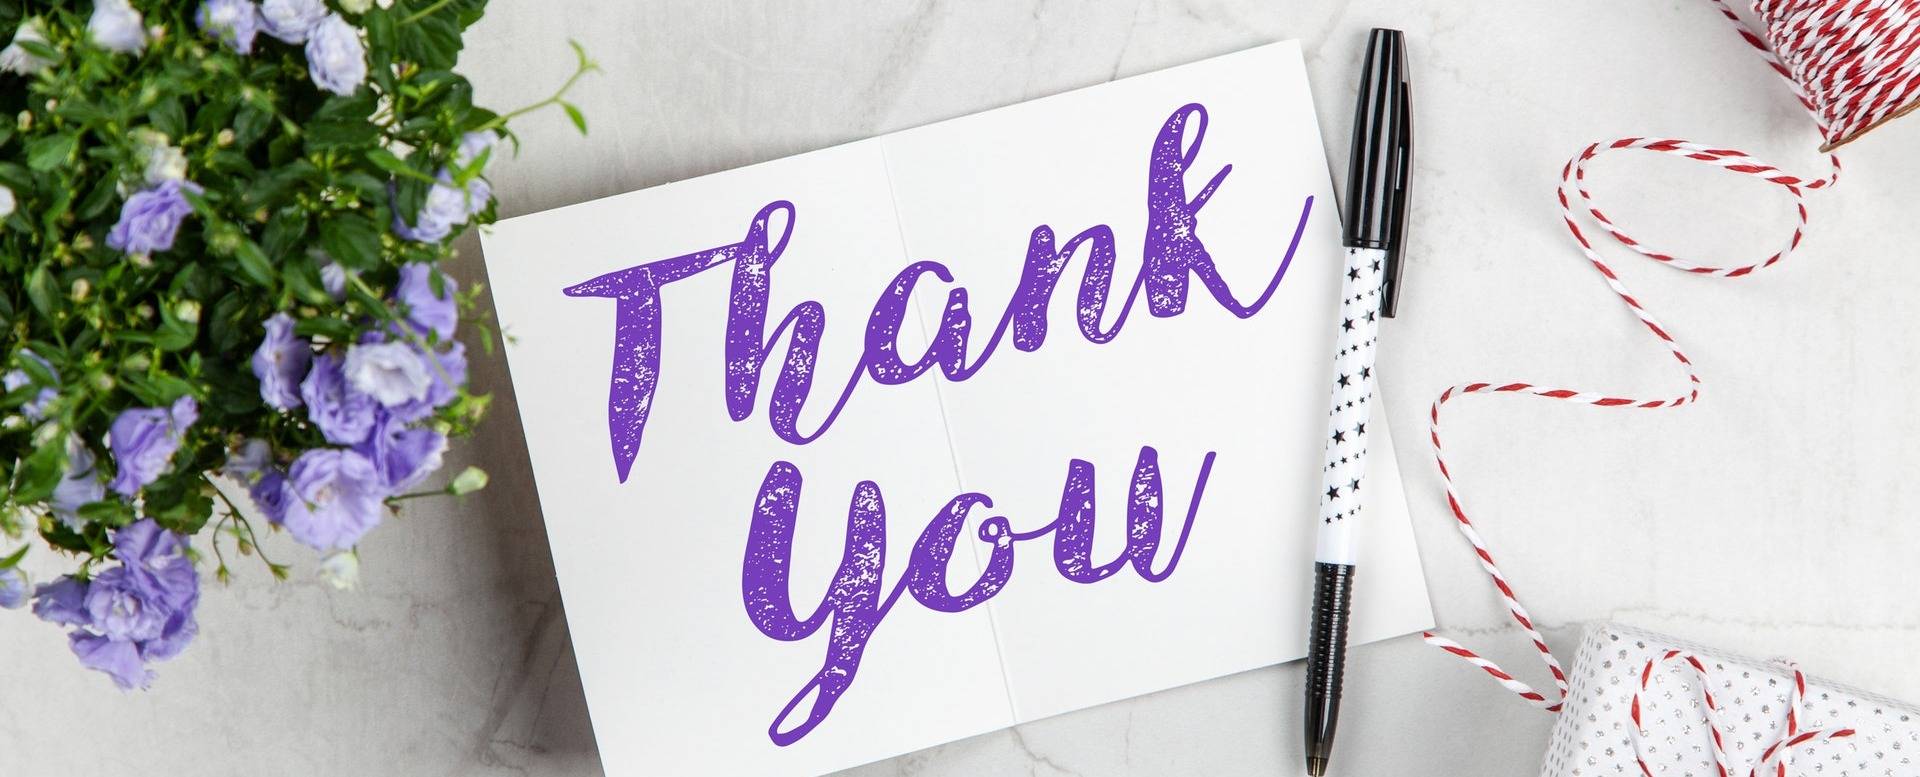 5 Thank You Letters To Send To People In Your Network Who Matter Idealist